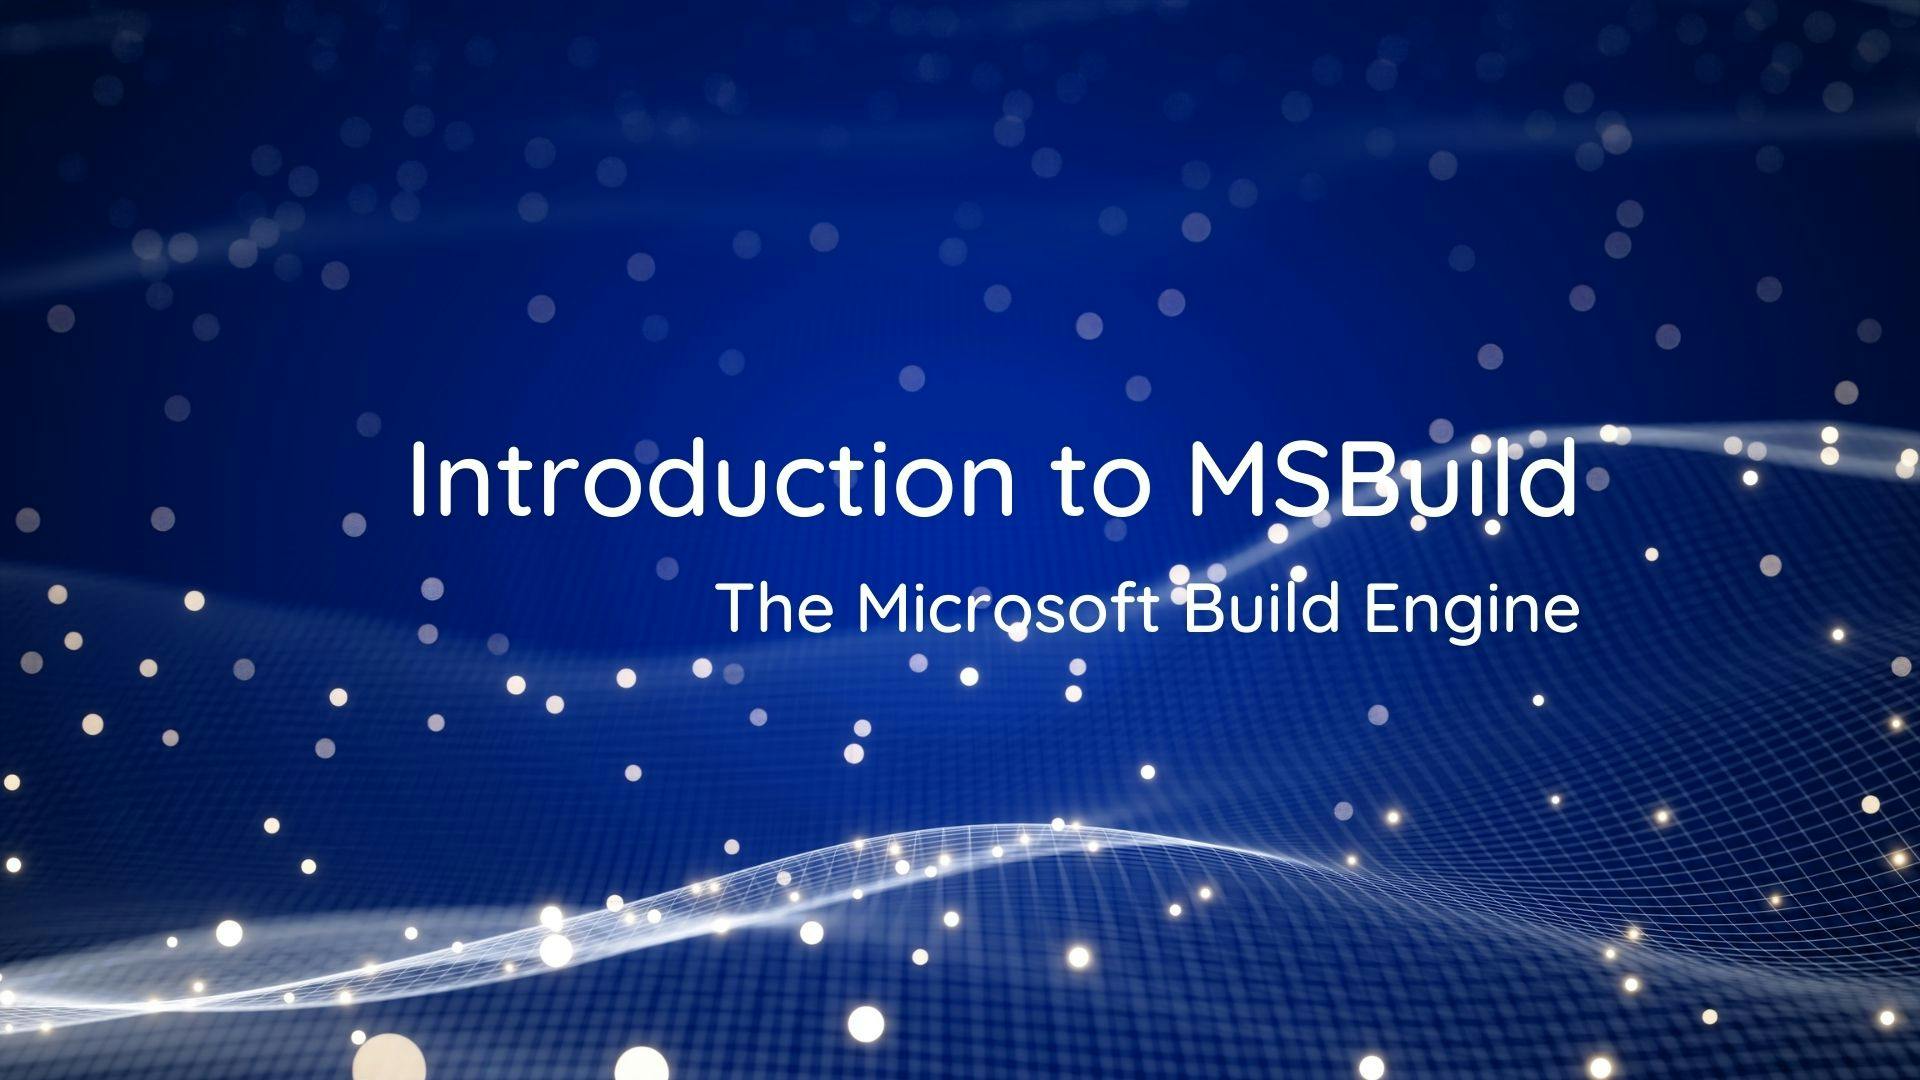 Introduction to MSBuild